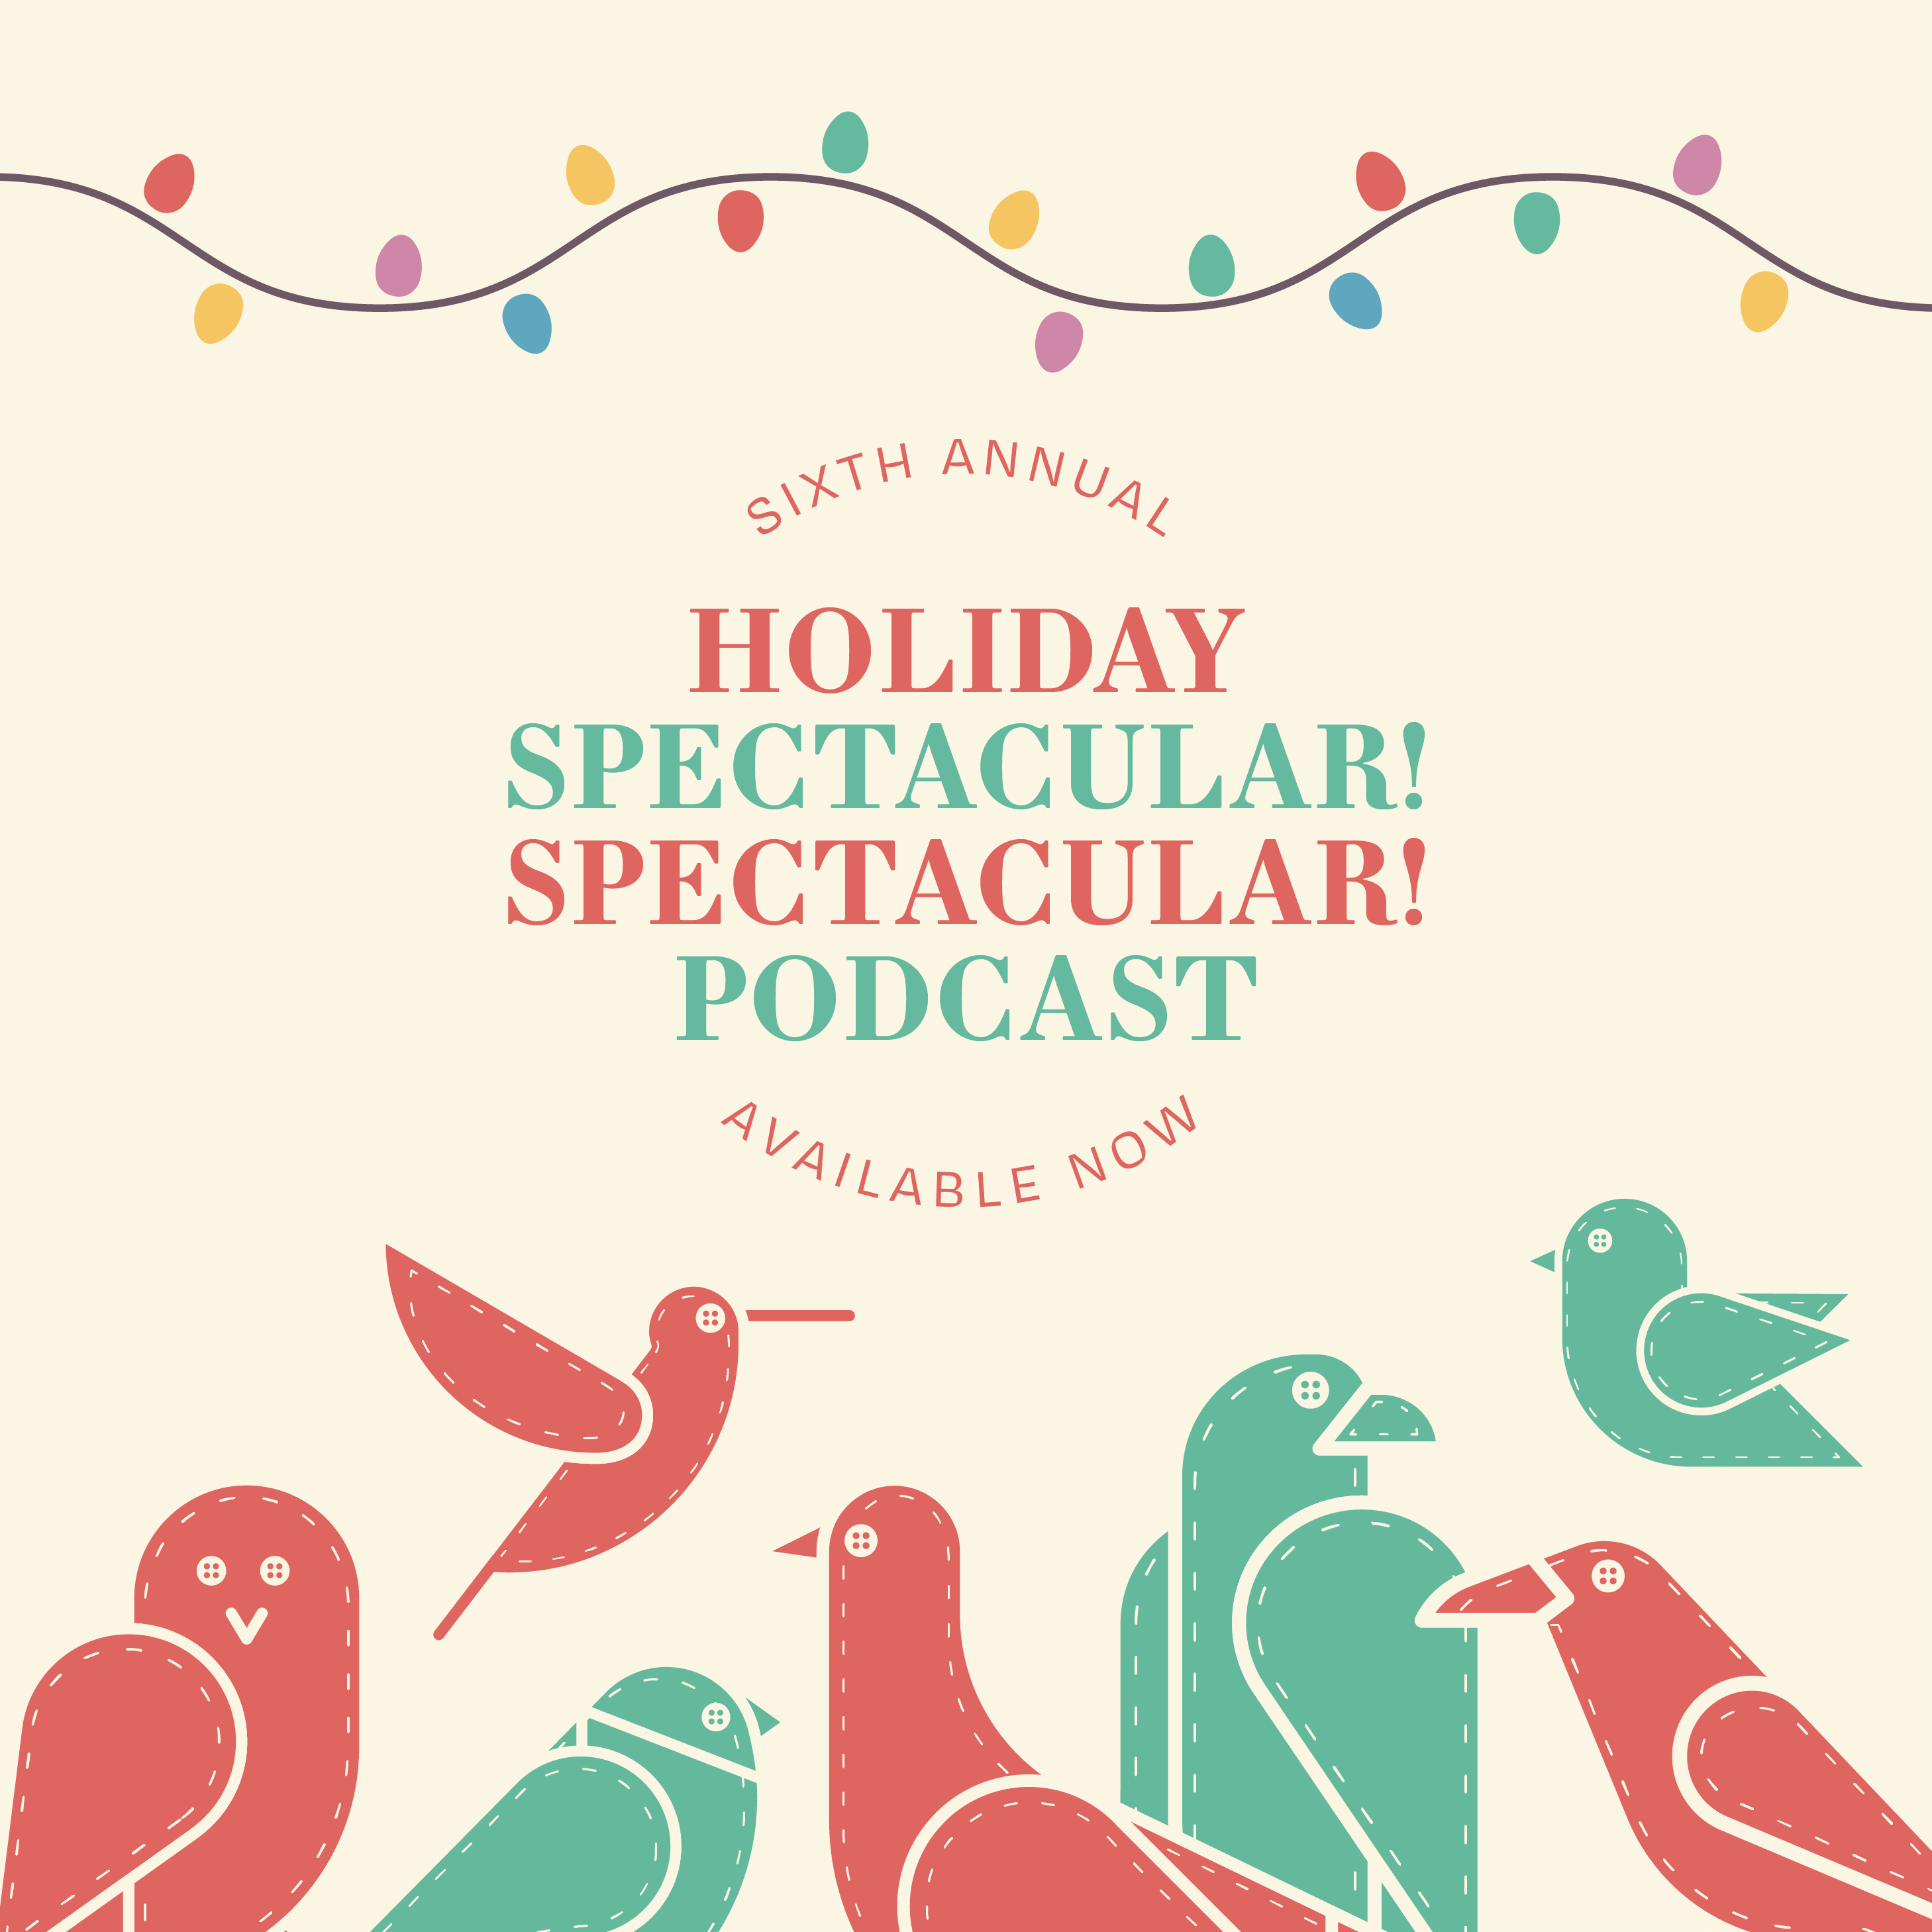 The 6th Annual Holiday Spectacular! Spectacular!